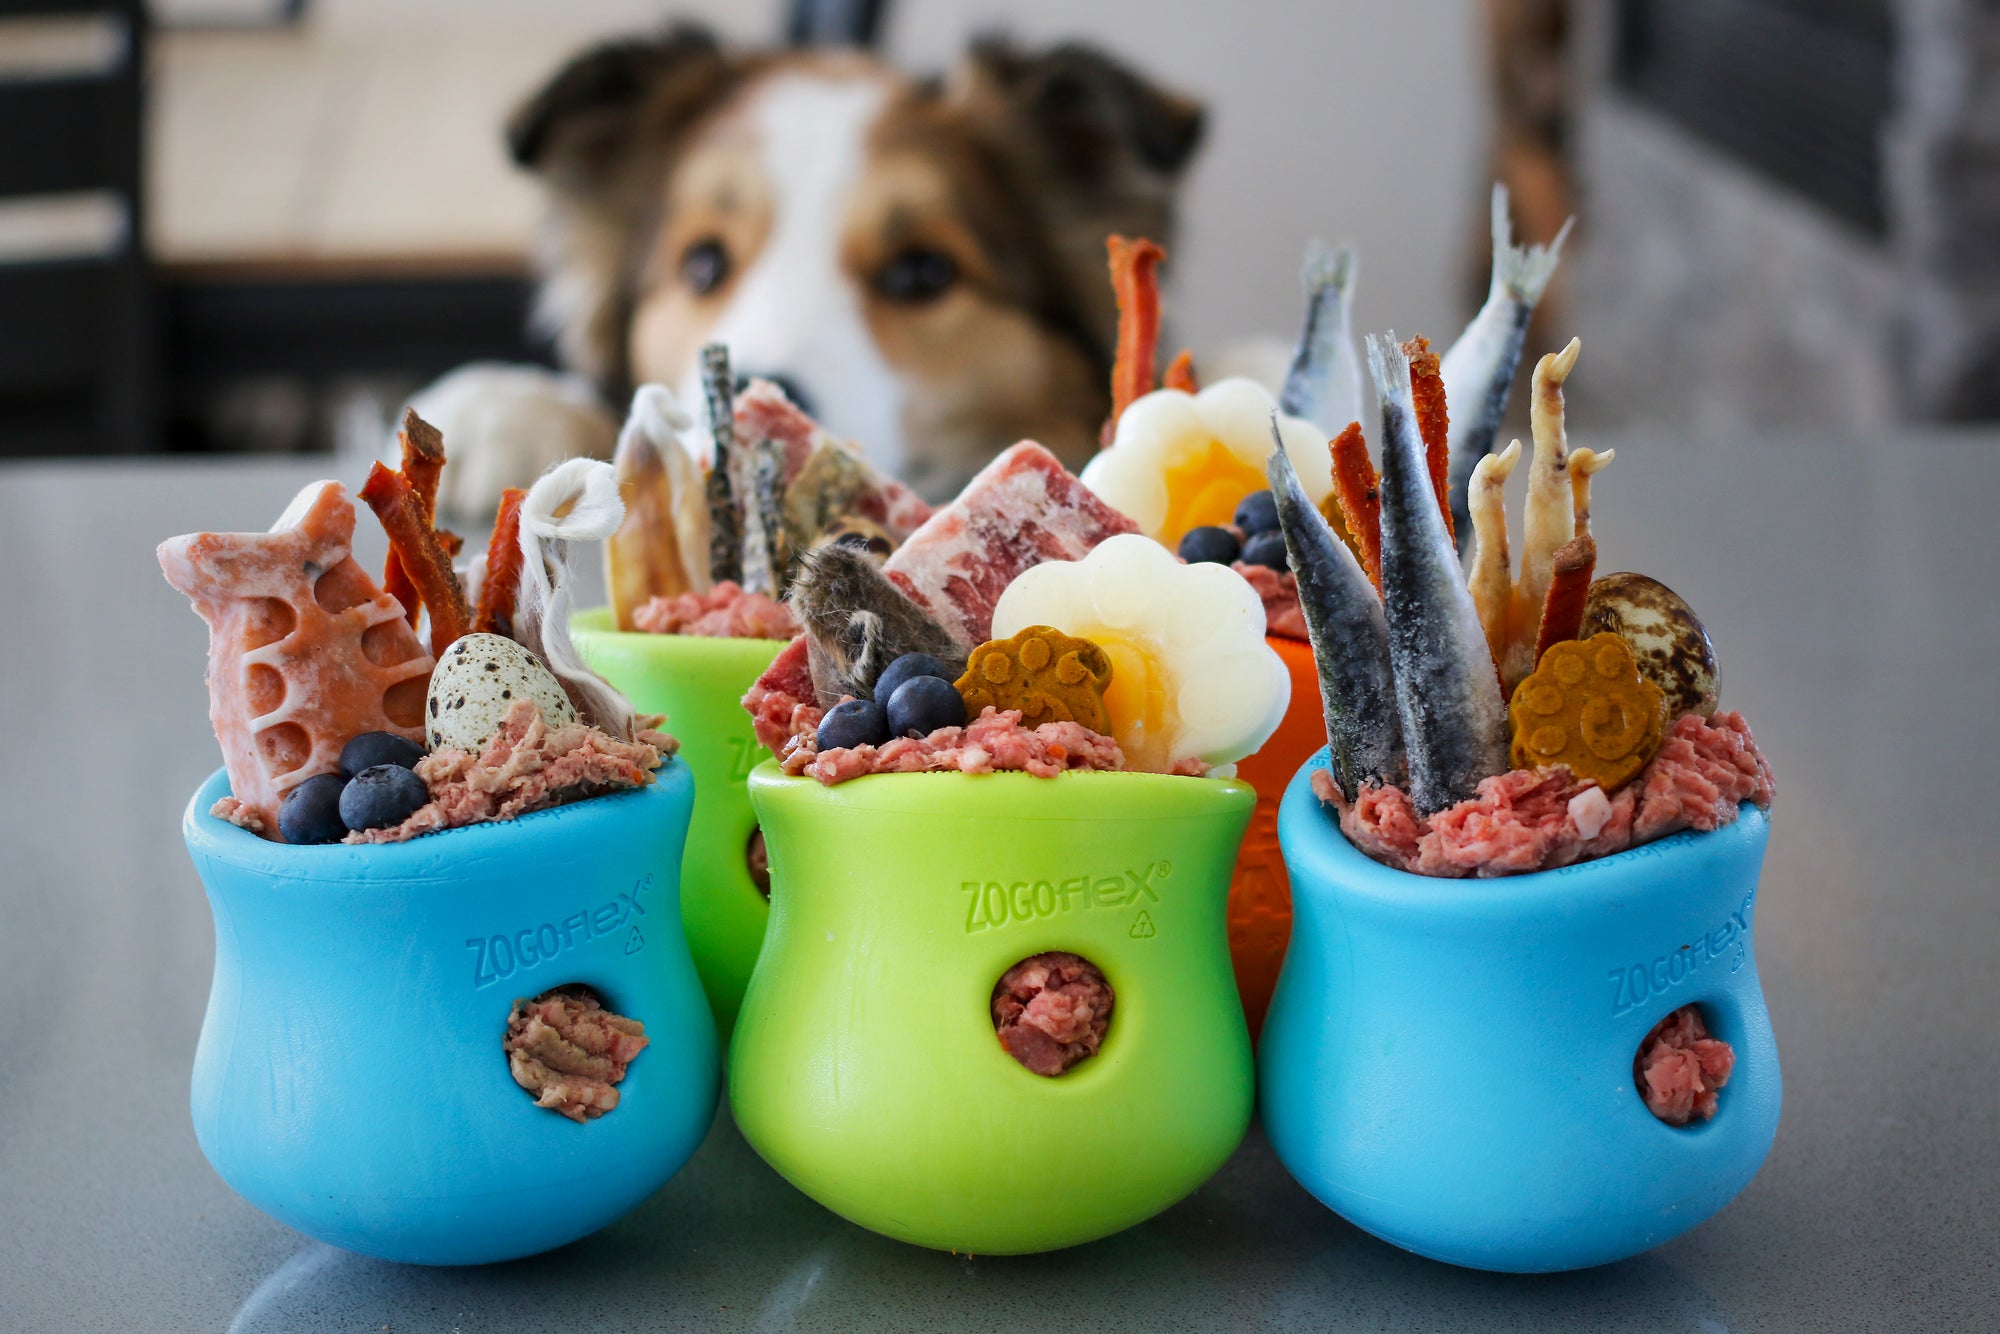 DIY Plastic-Free Food Puzzle for Dogs - Oh My Dog!